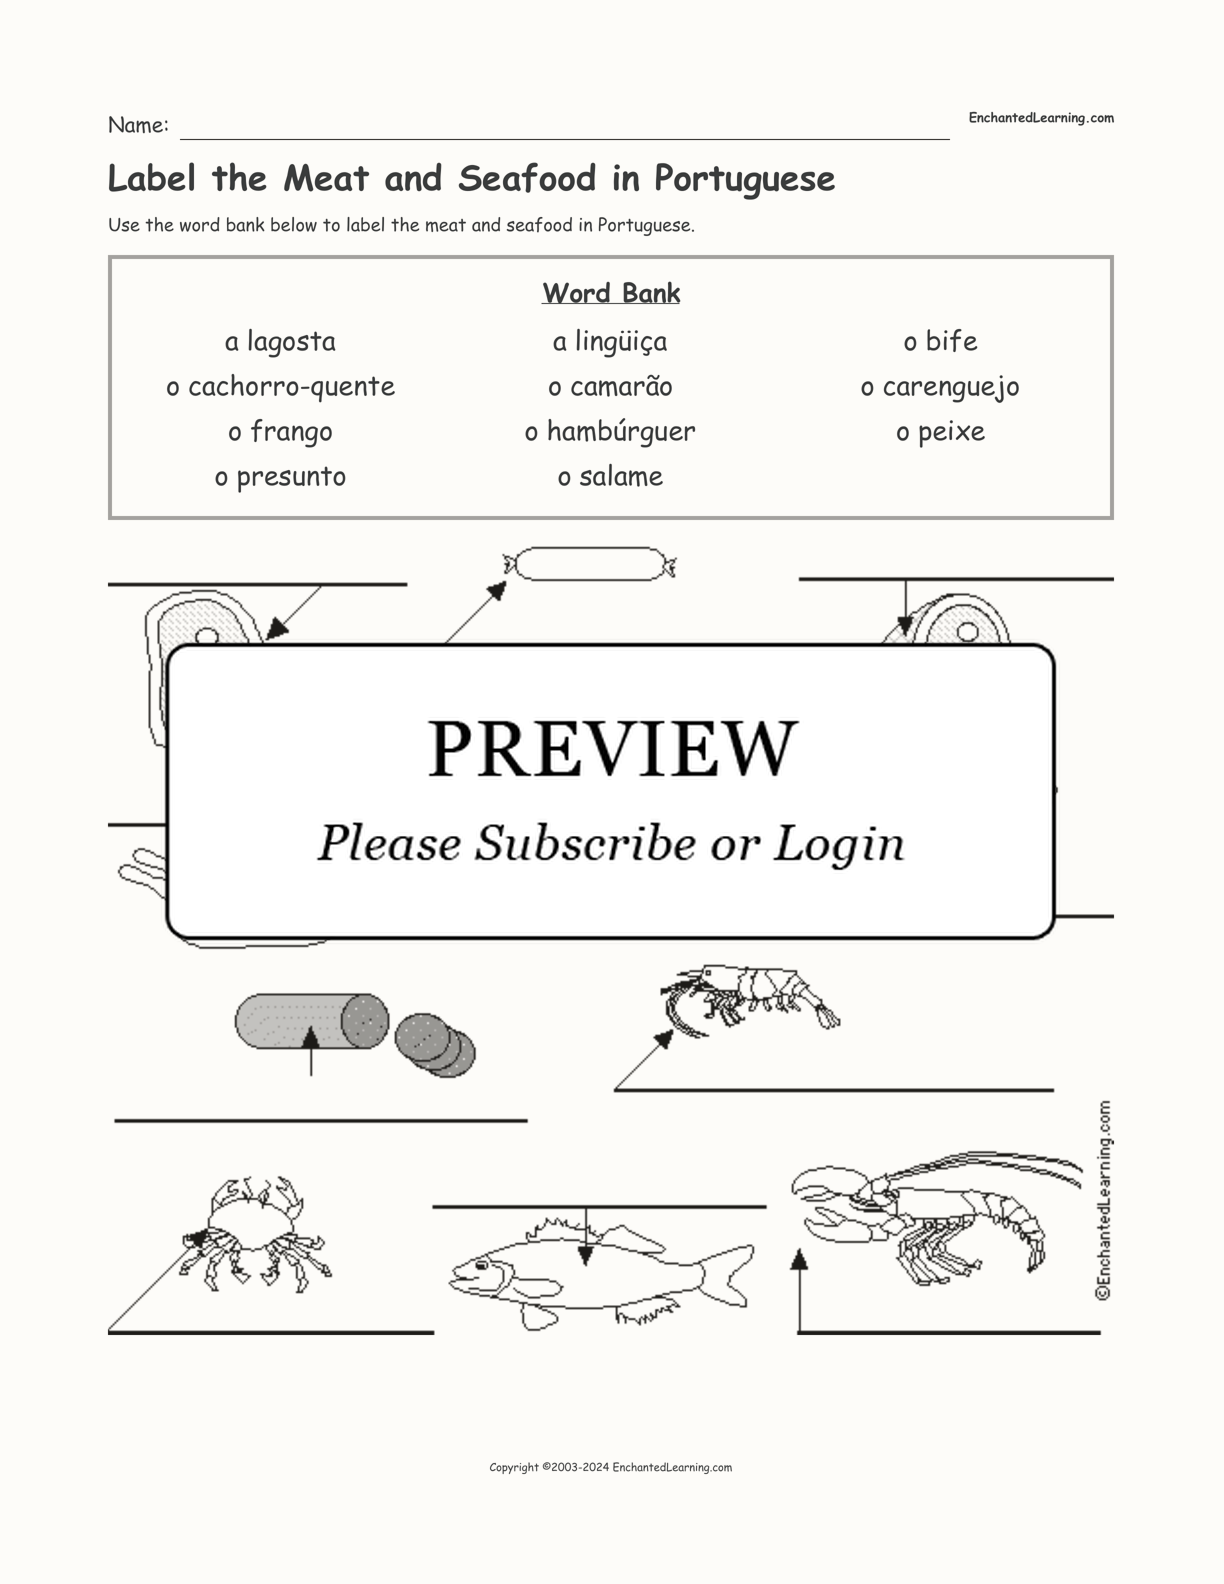 Label the Meat and Seafood in Portuguese interactive worksheet page 1